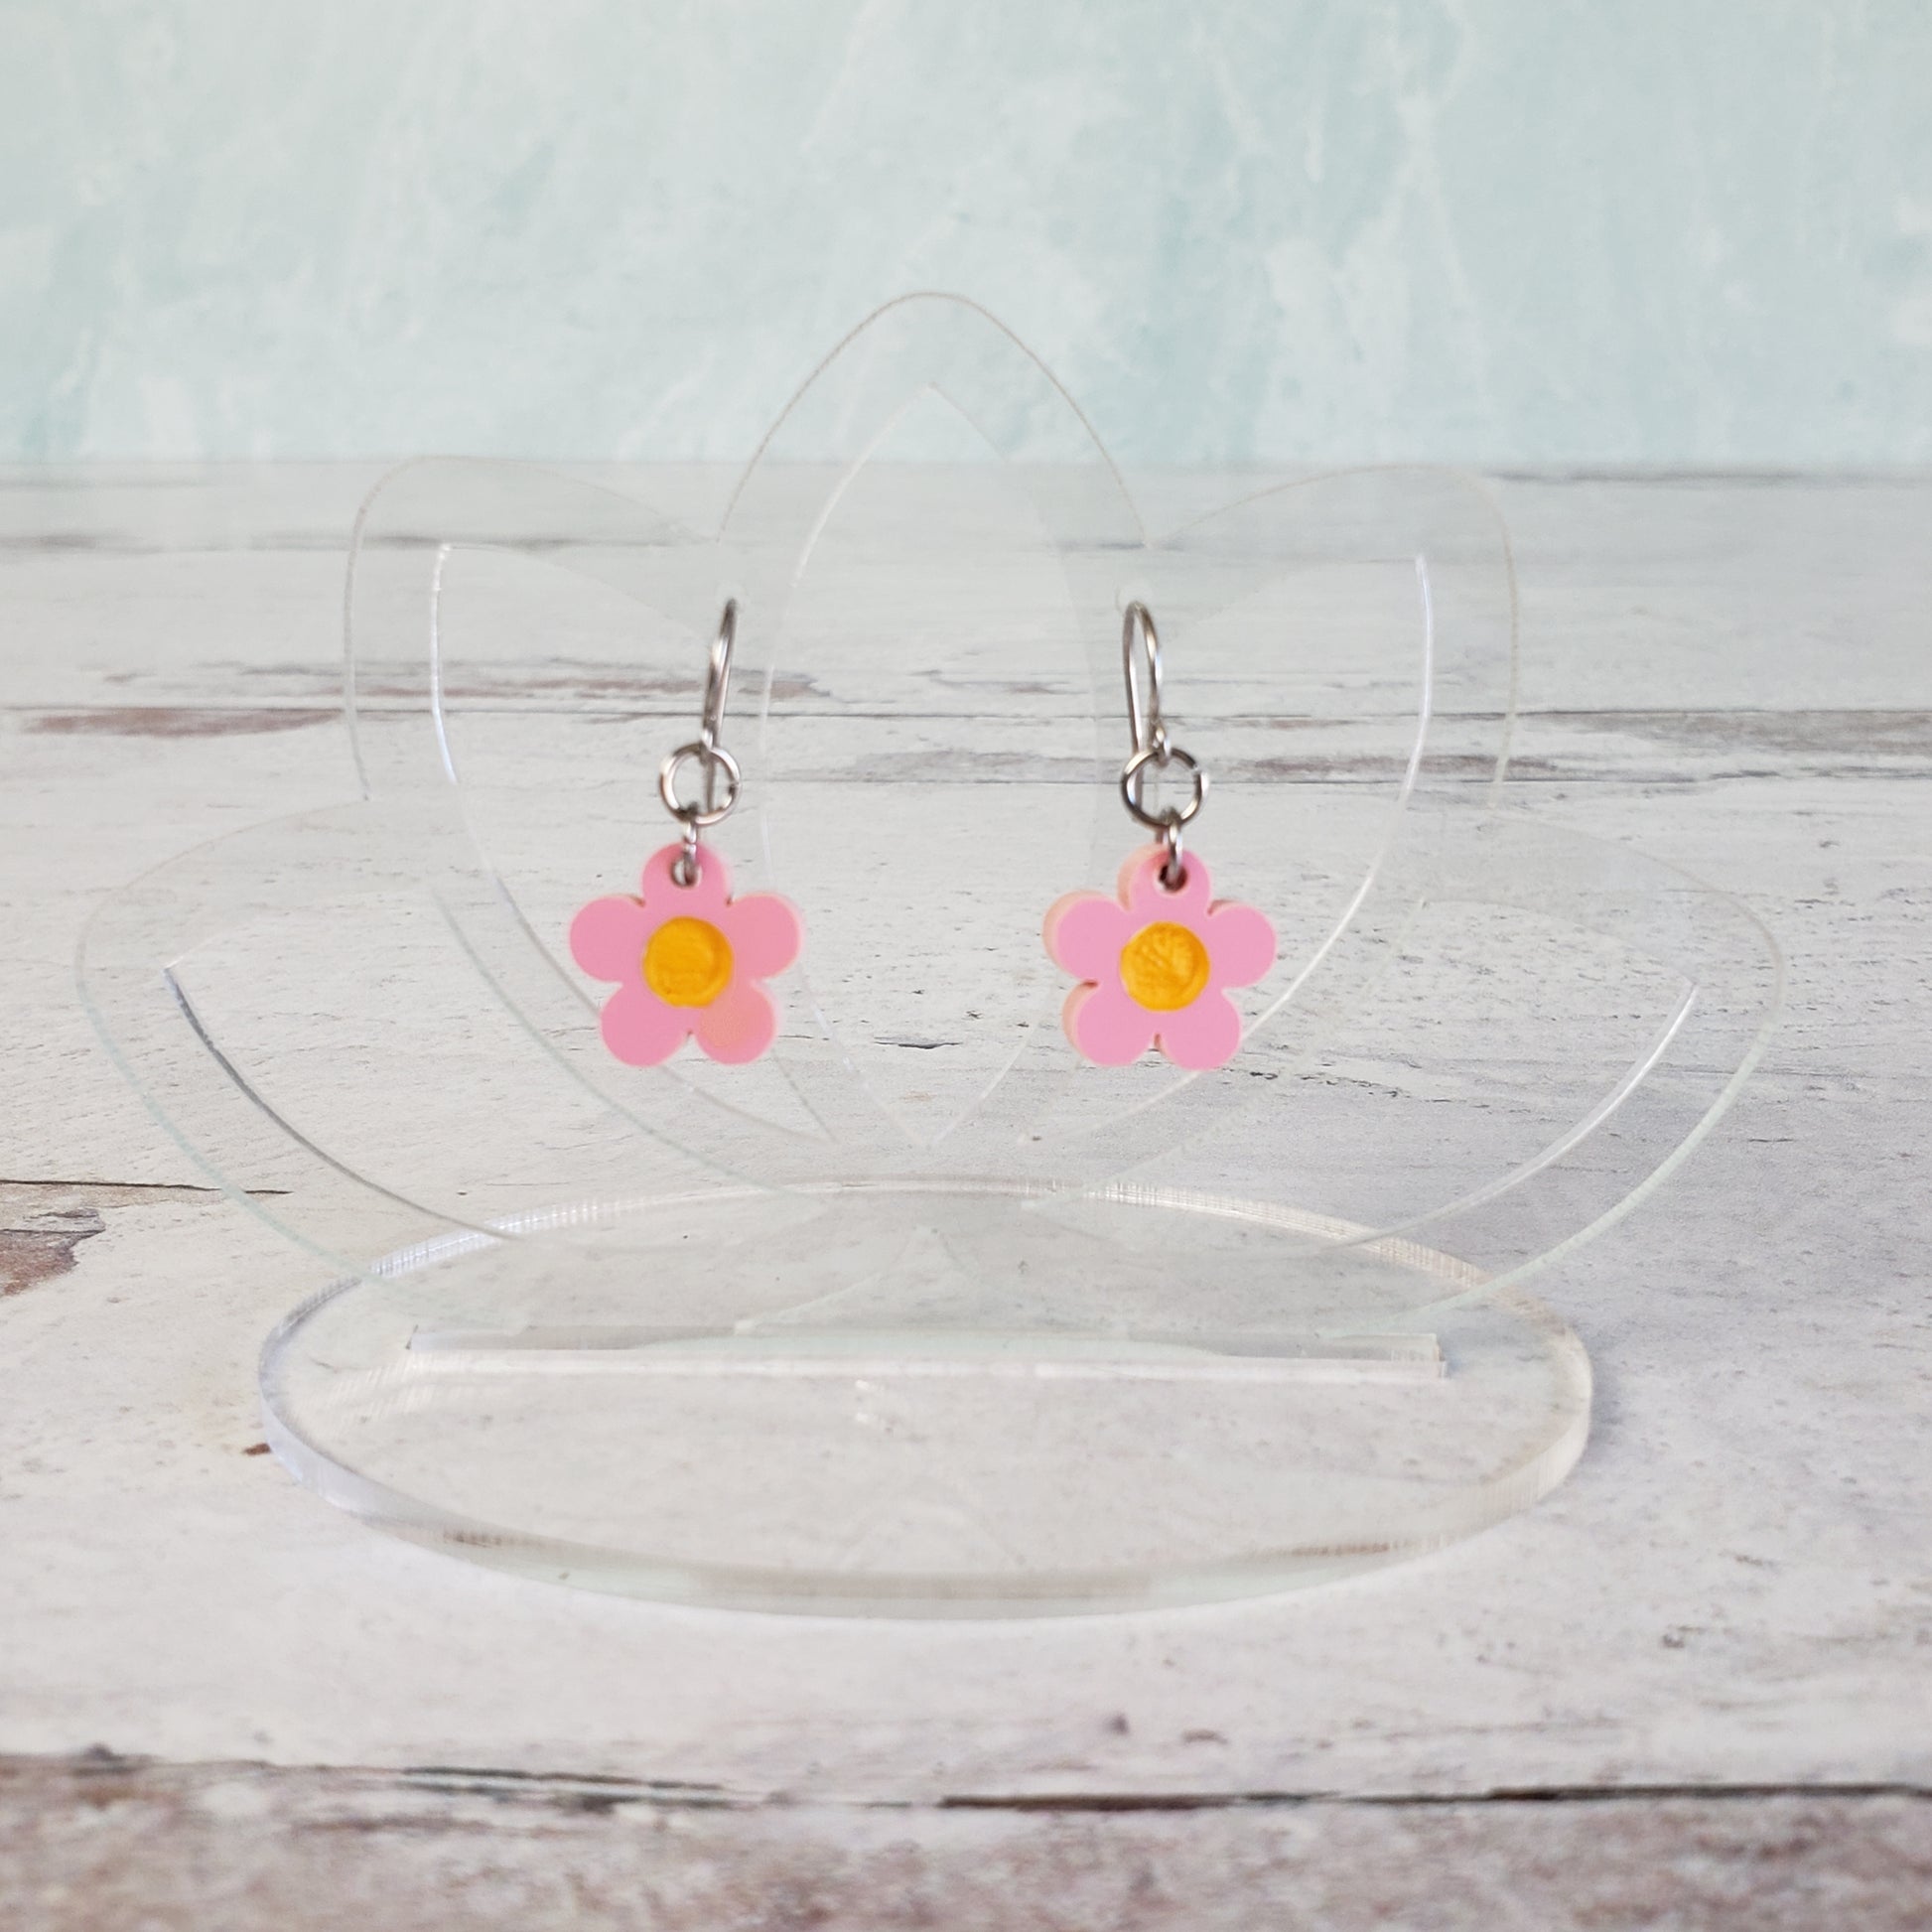 Pink daisy earrings on hanging display